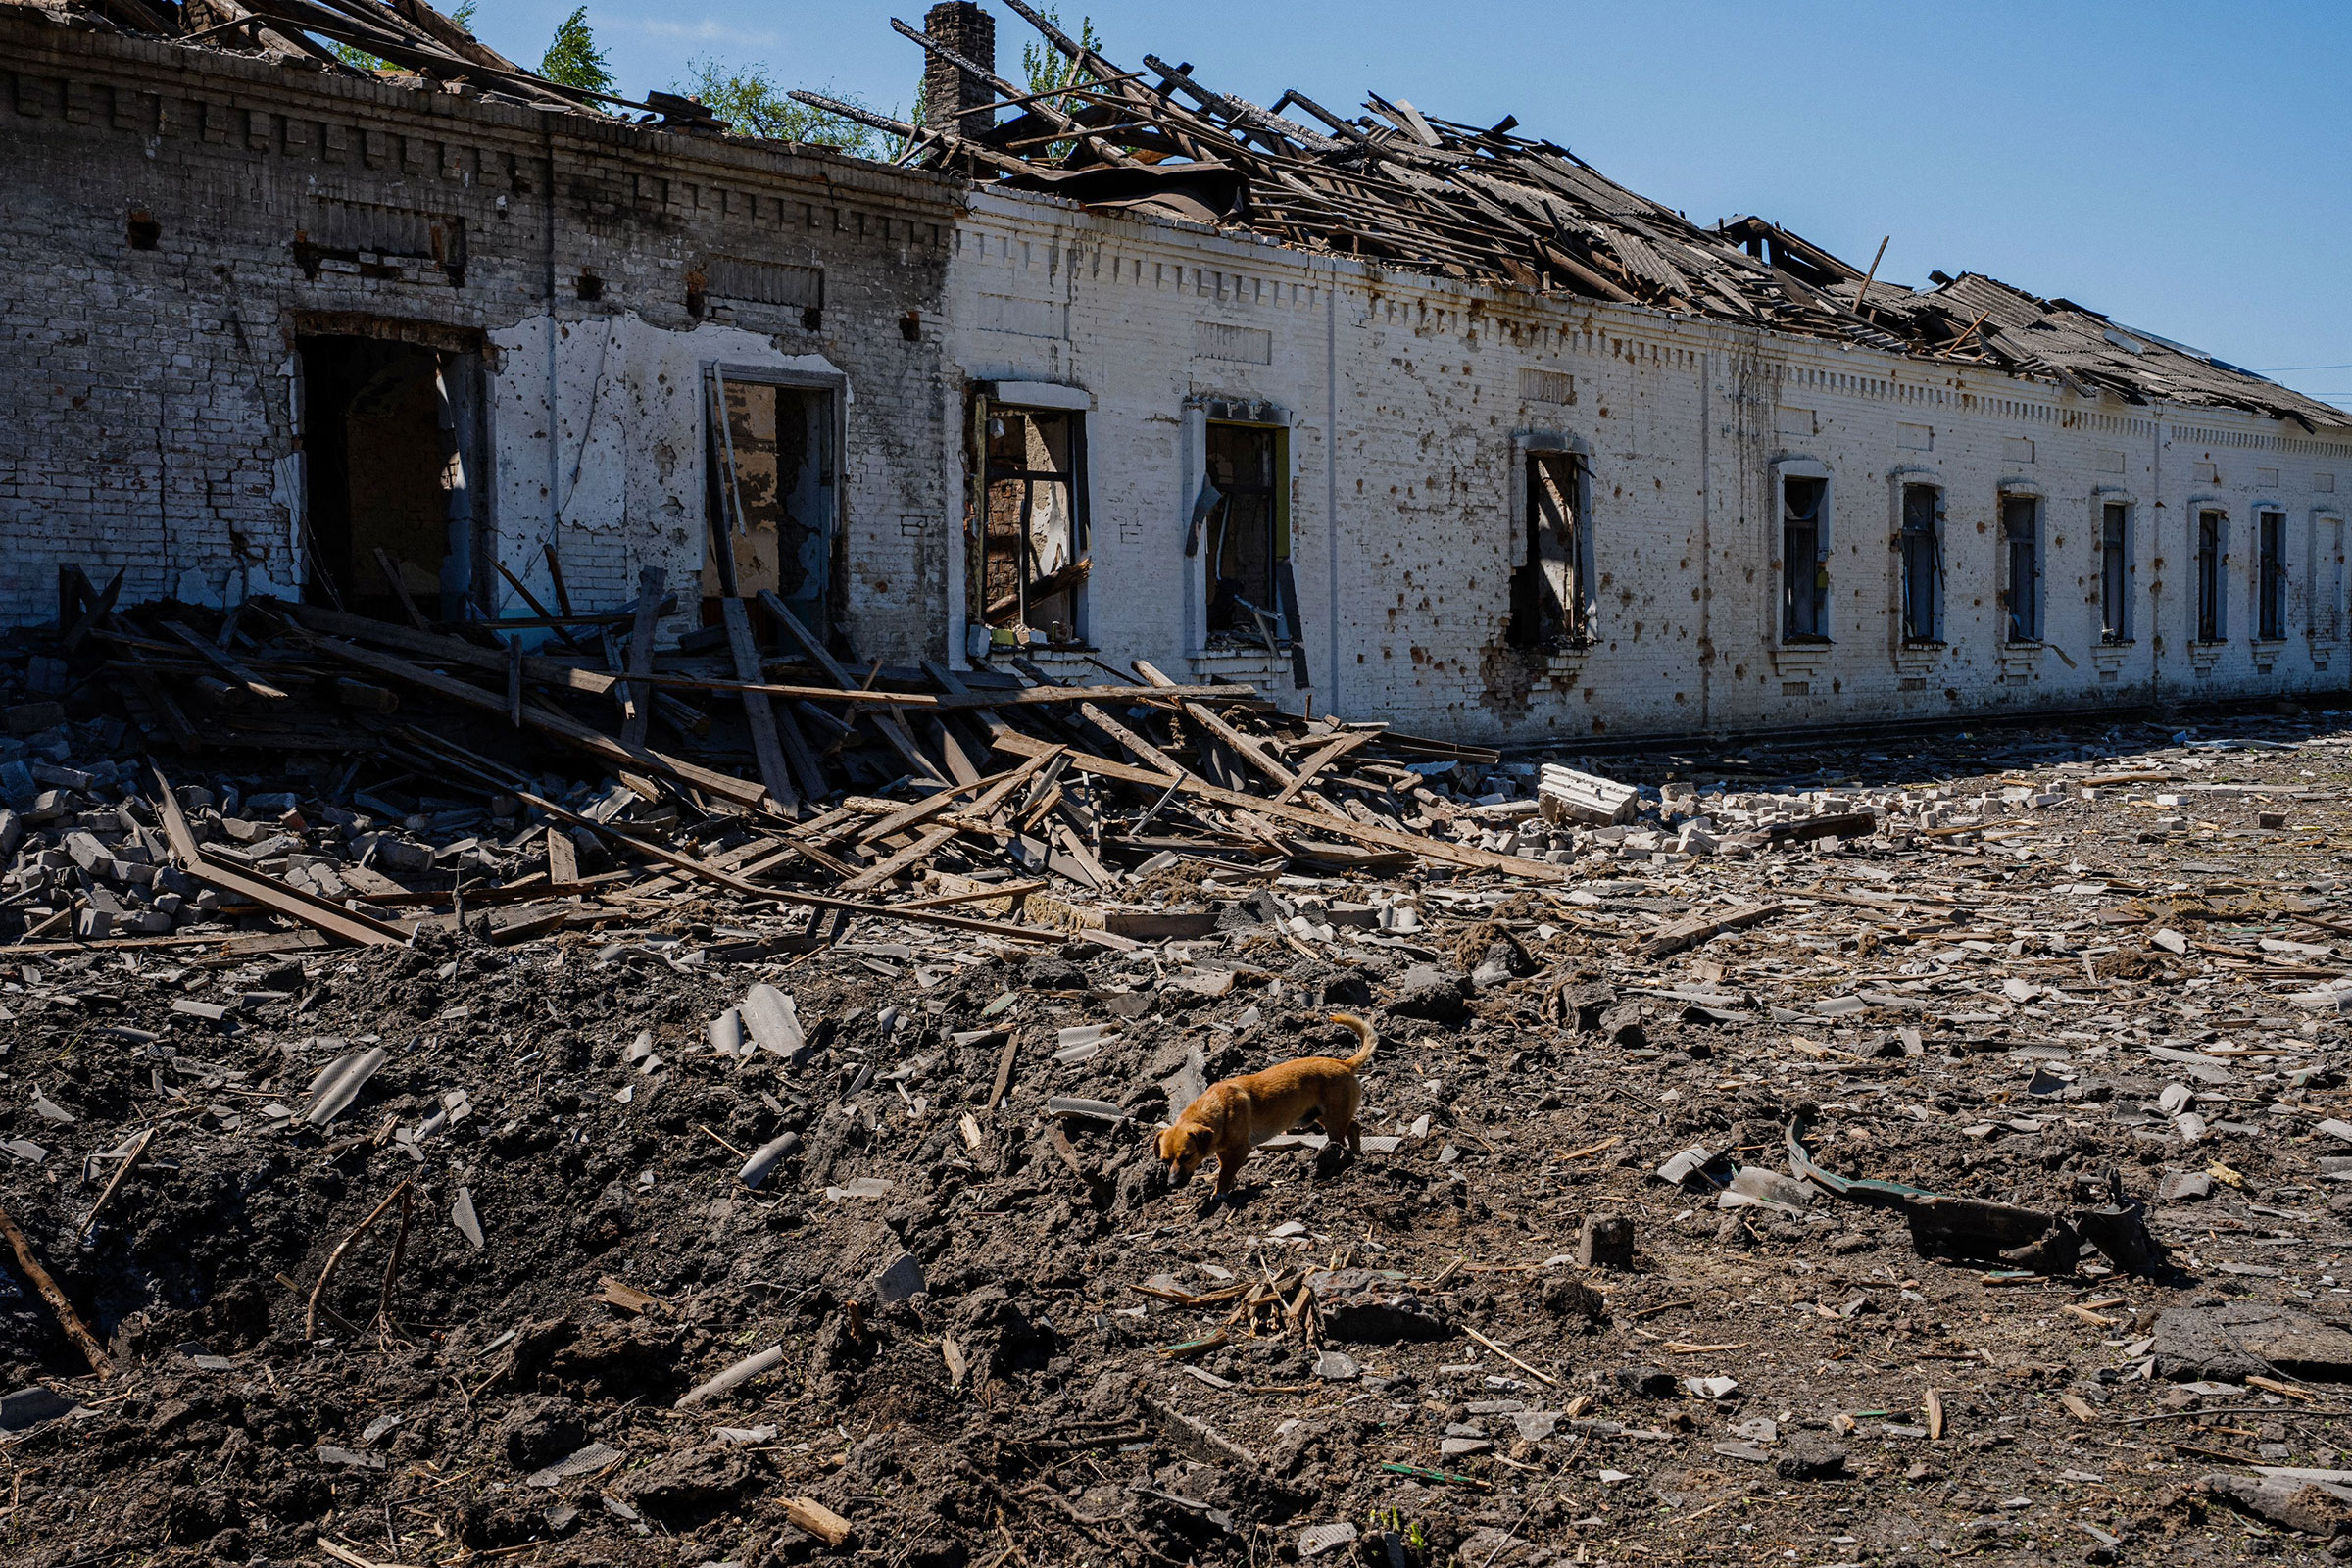 A dog walks on the debris of a destroyed building after an air bombing in the town of Orikhiv, in the Zaporizhzhia region, on May 7.